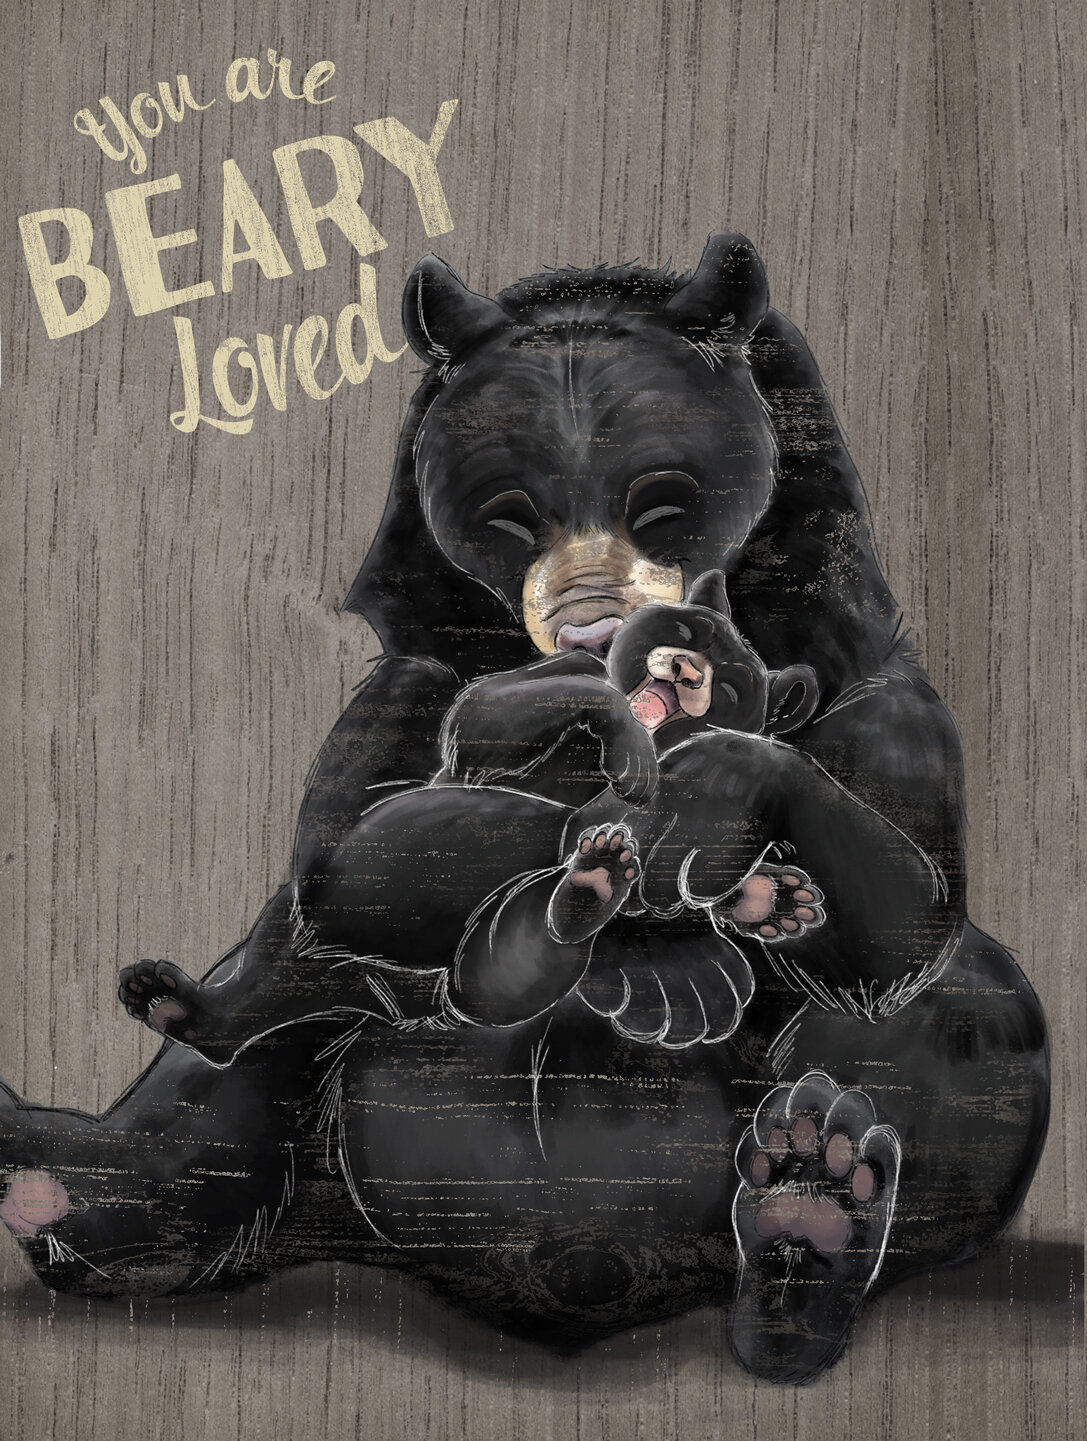 "You Are Beary Loved"